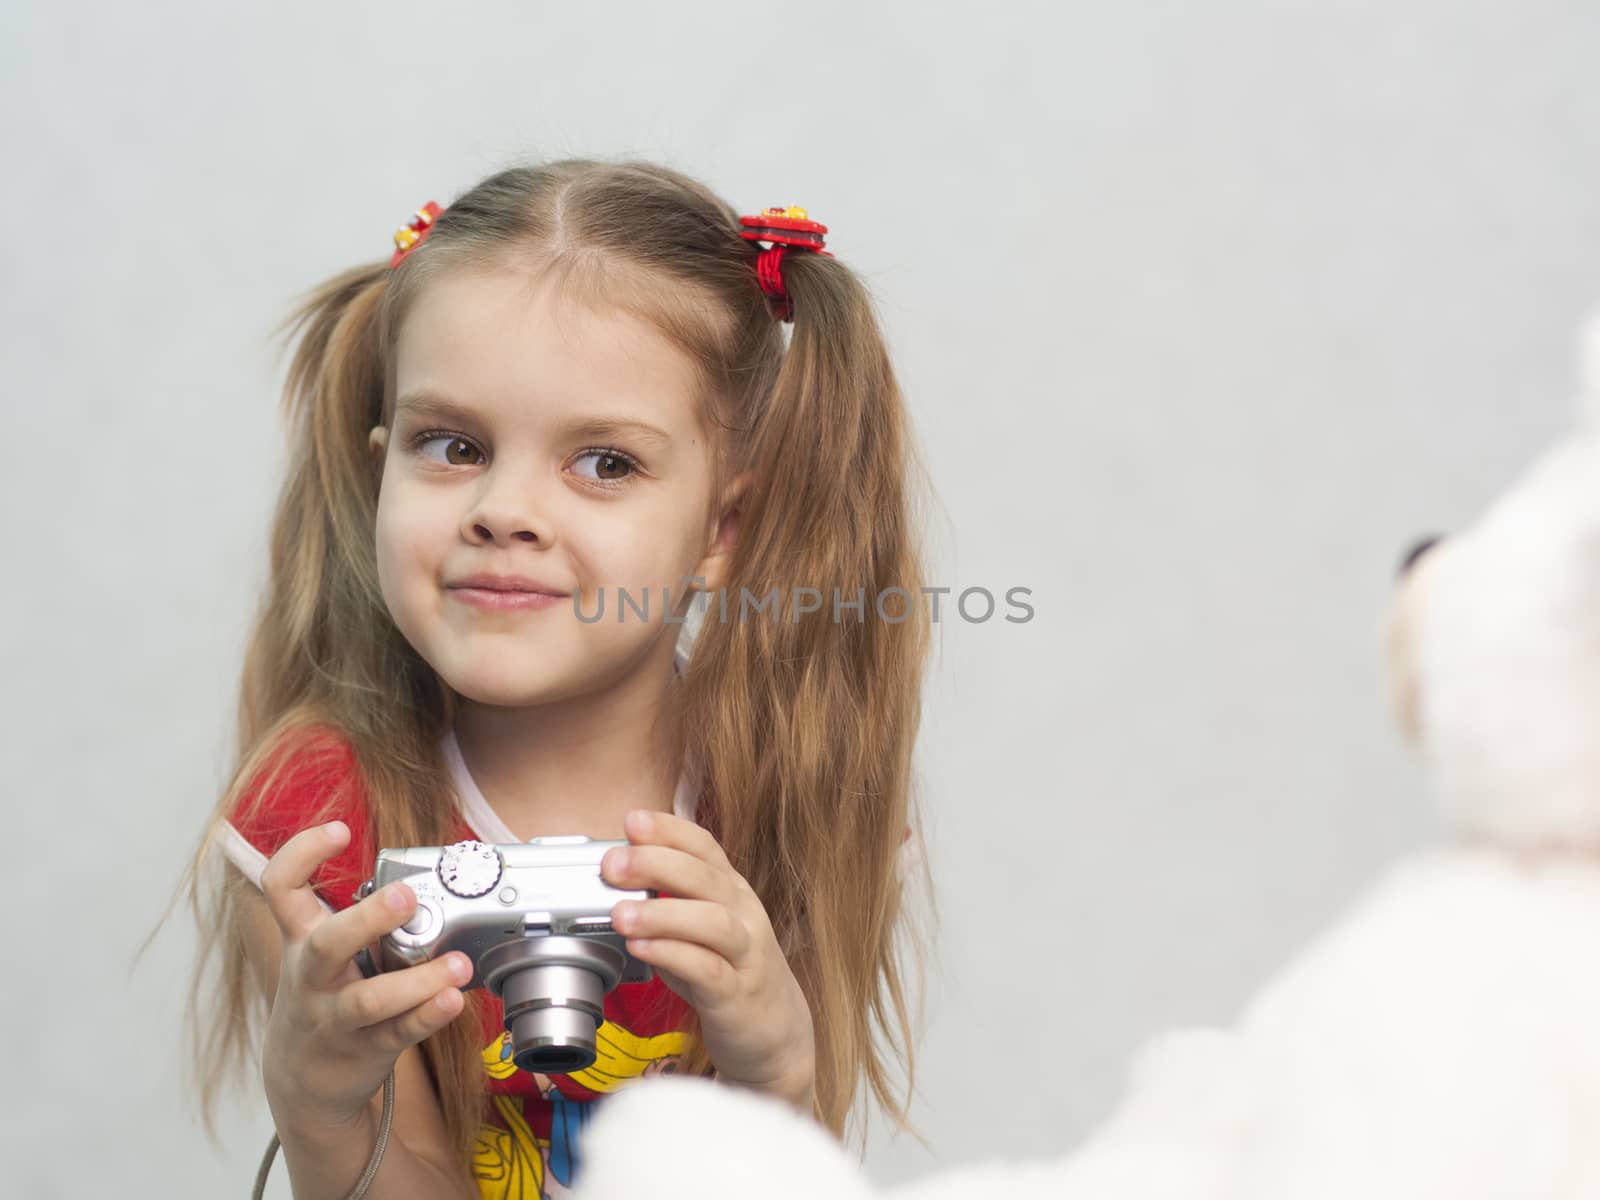 Girl playing in the photographer. Girl takes photo of Teddy digital camera and compares the result with the original.